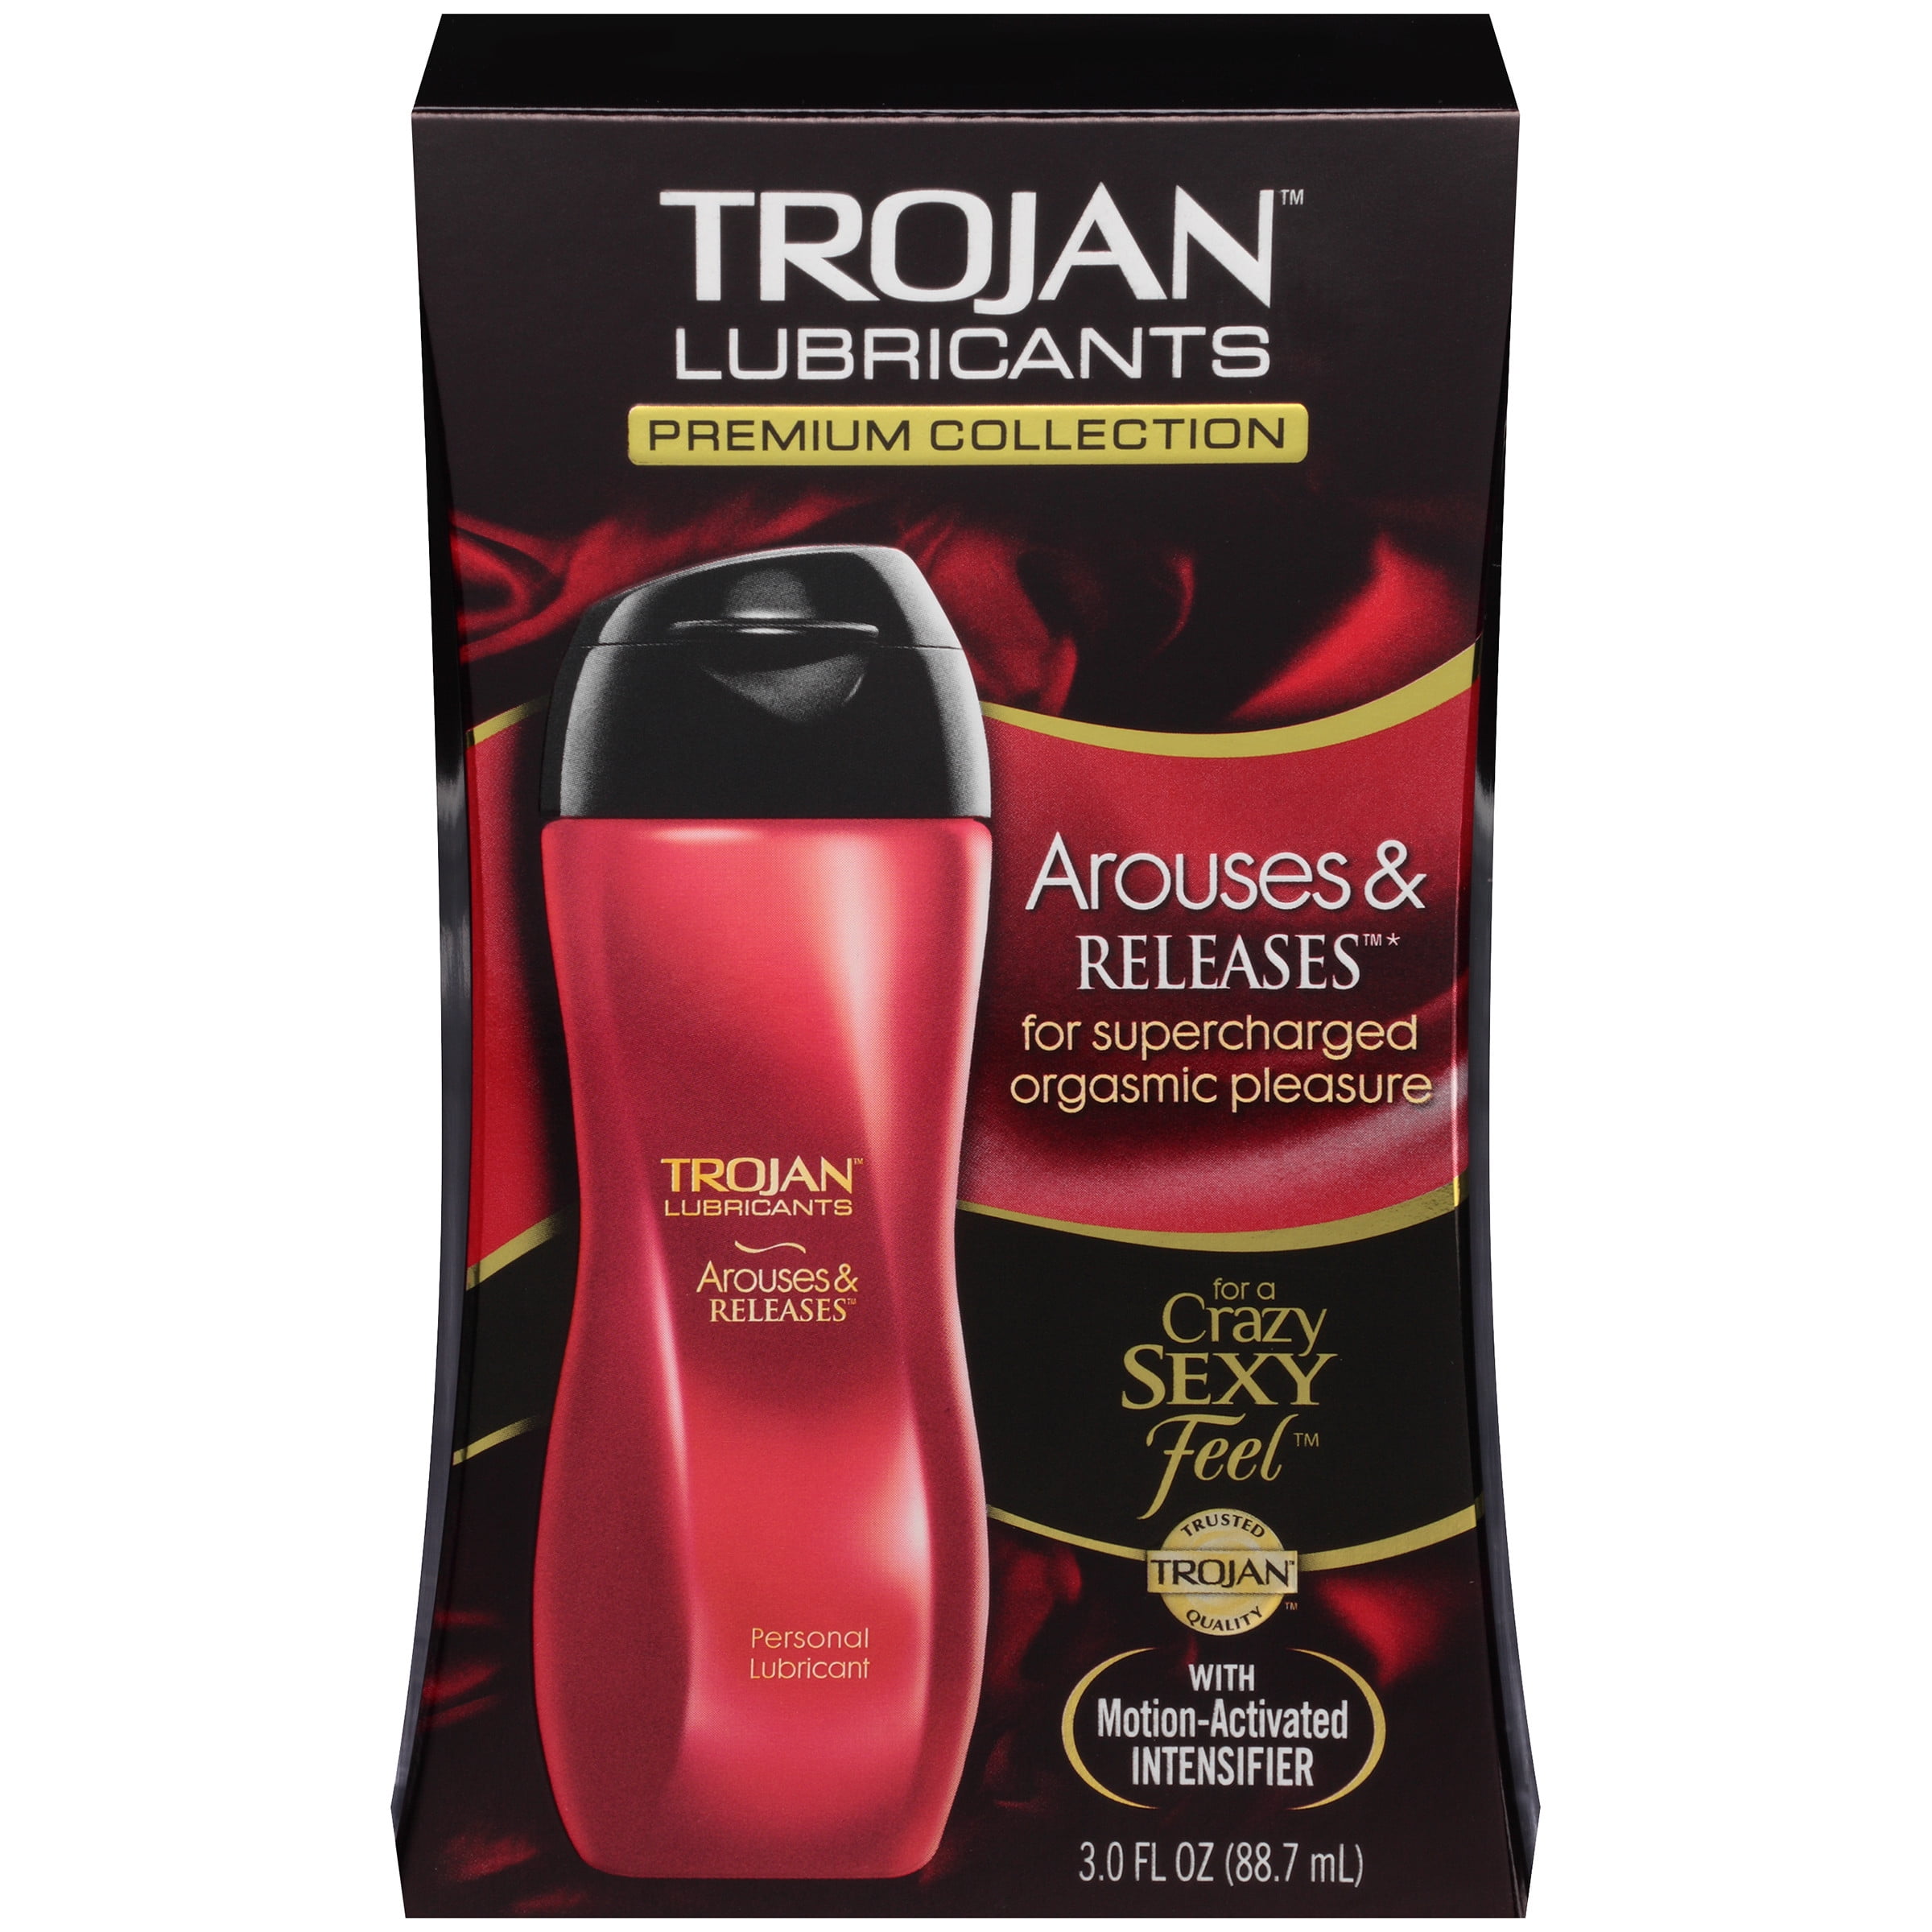 TROJAN Arouses & Releases Personal Lubricant, 3 oz. 